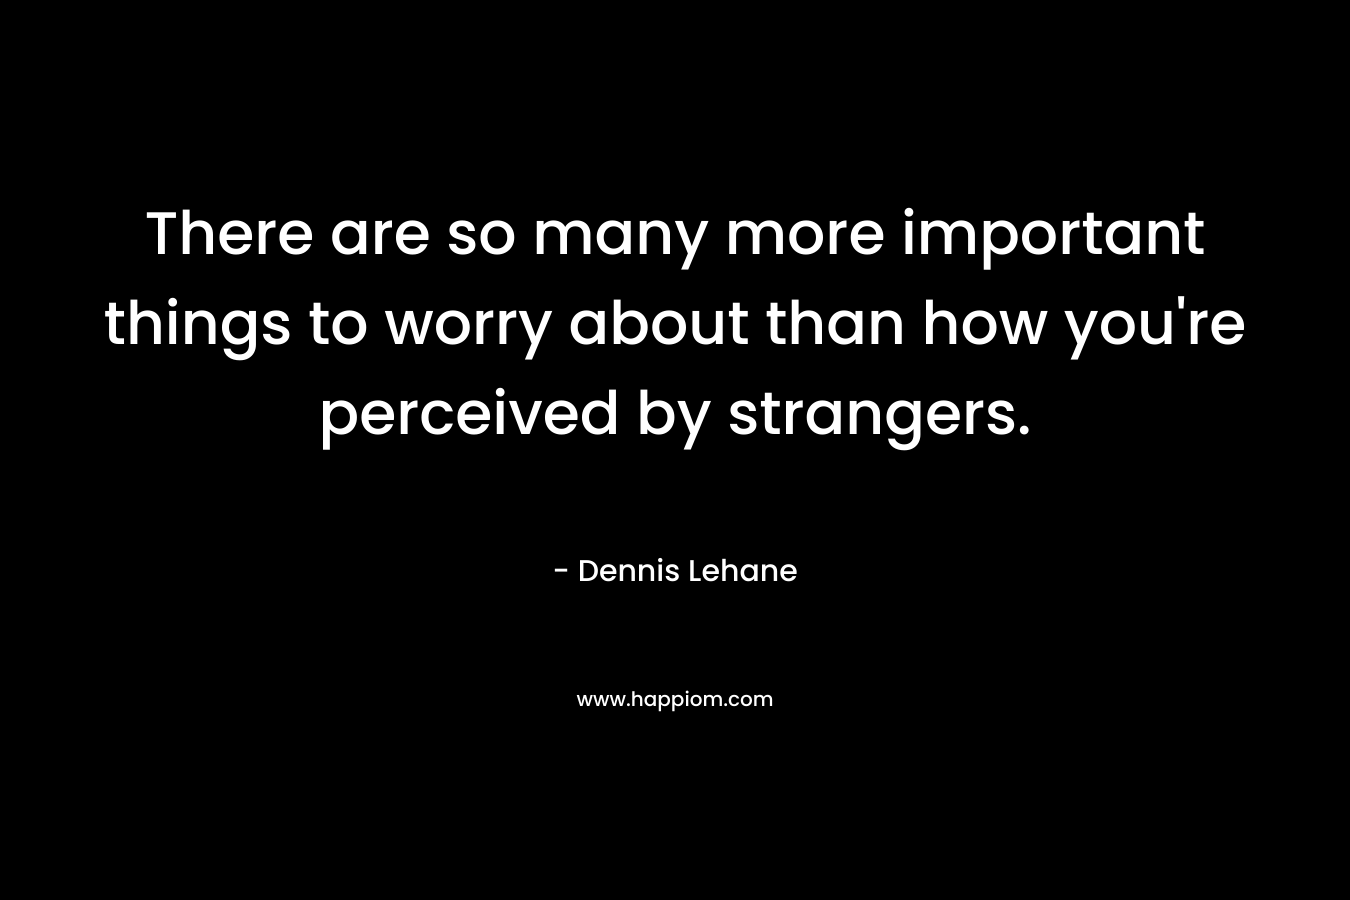 There are so many more important things to worry about than how you’re perceived by strangers. – Dennis Lehane